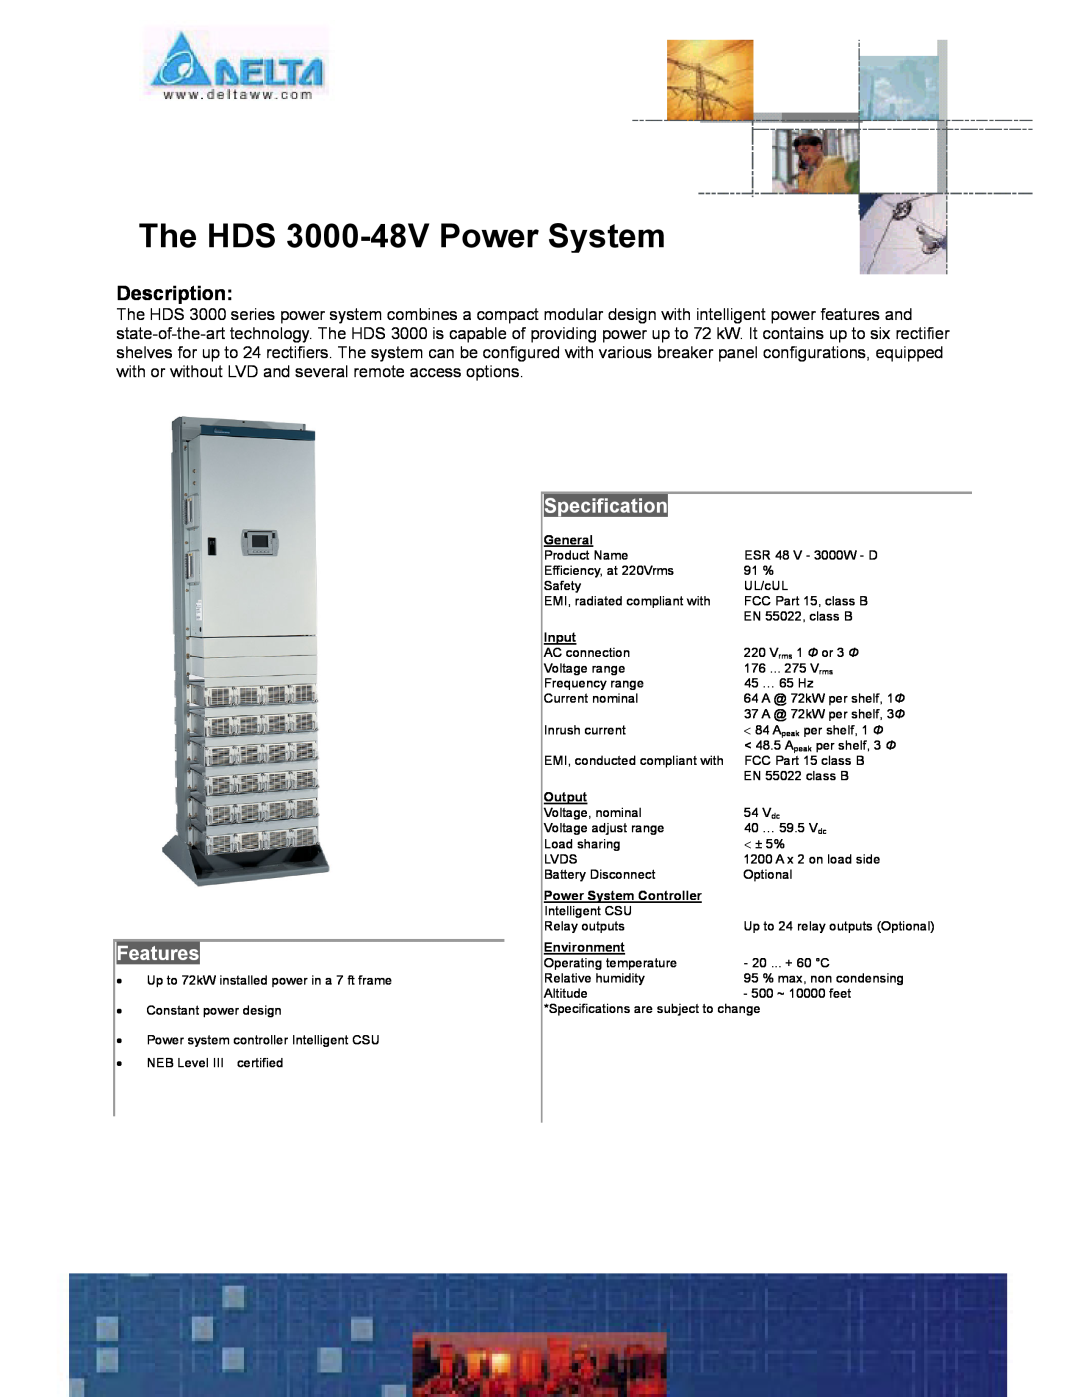 Delta specifications The HDS 3000-48V Power System, Description, Features, Specification, General, Input, Output 